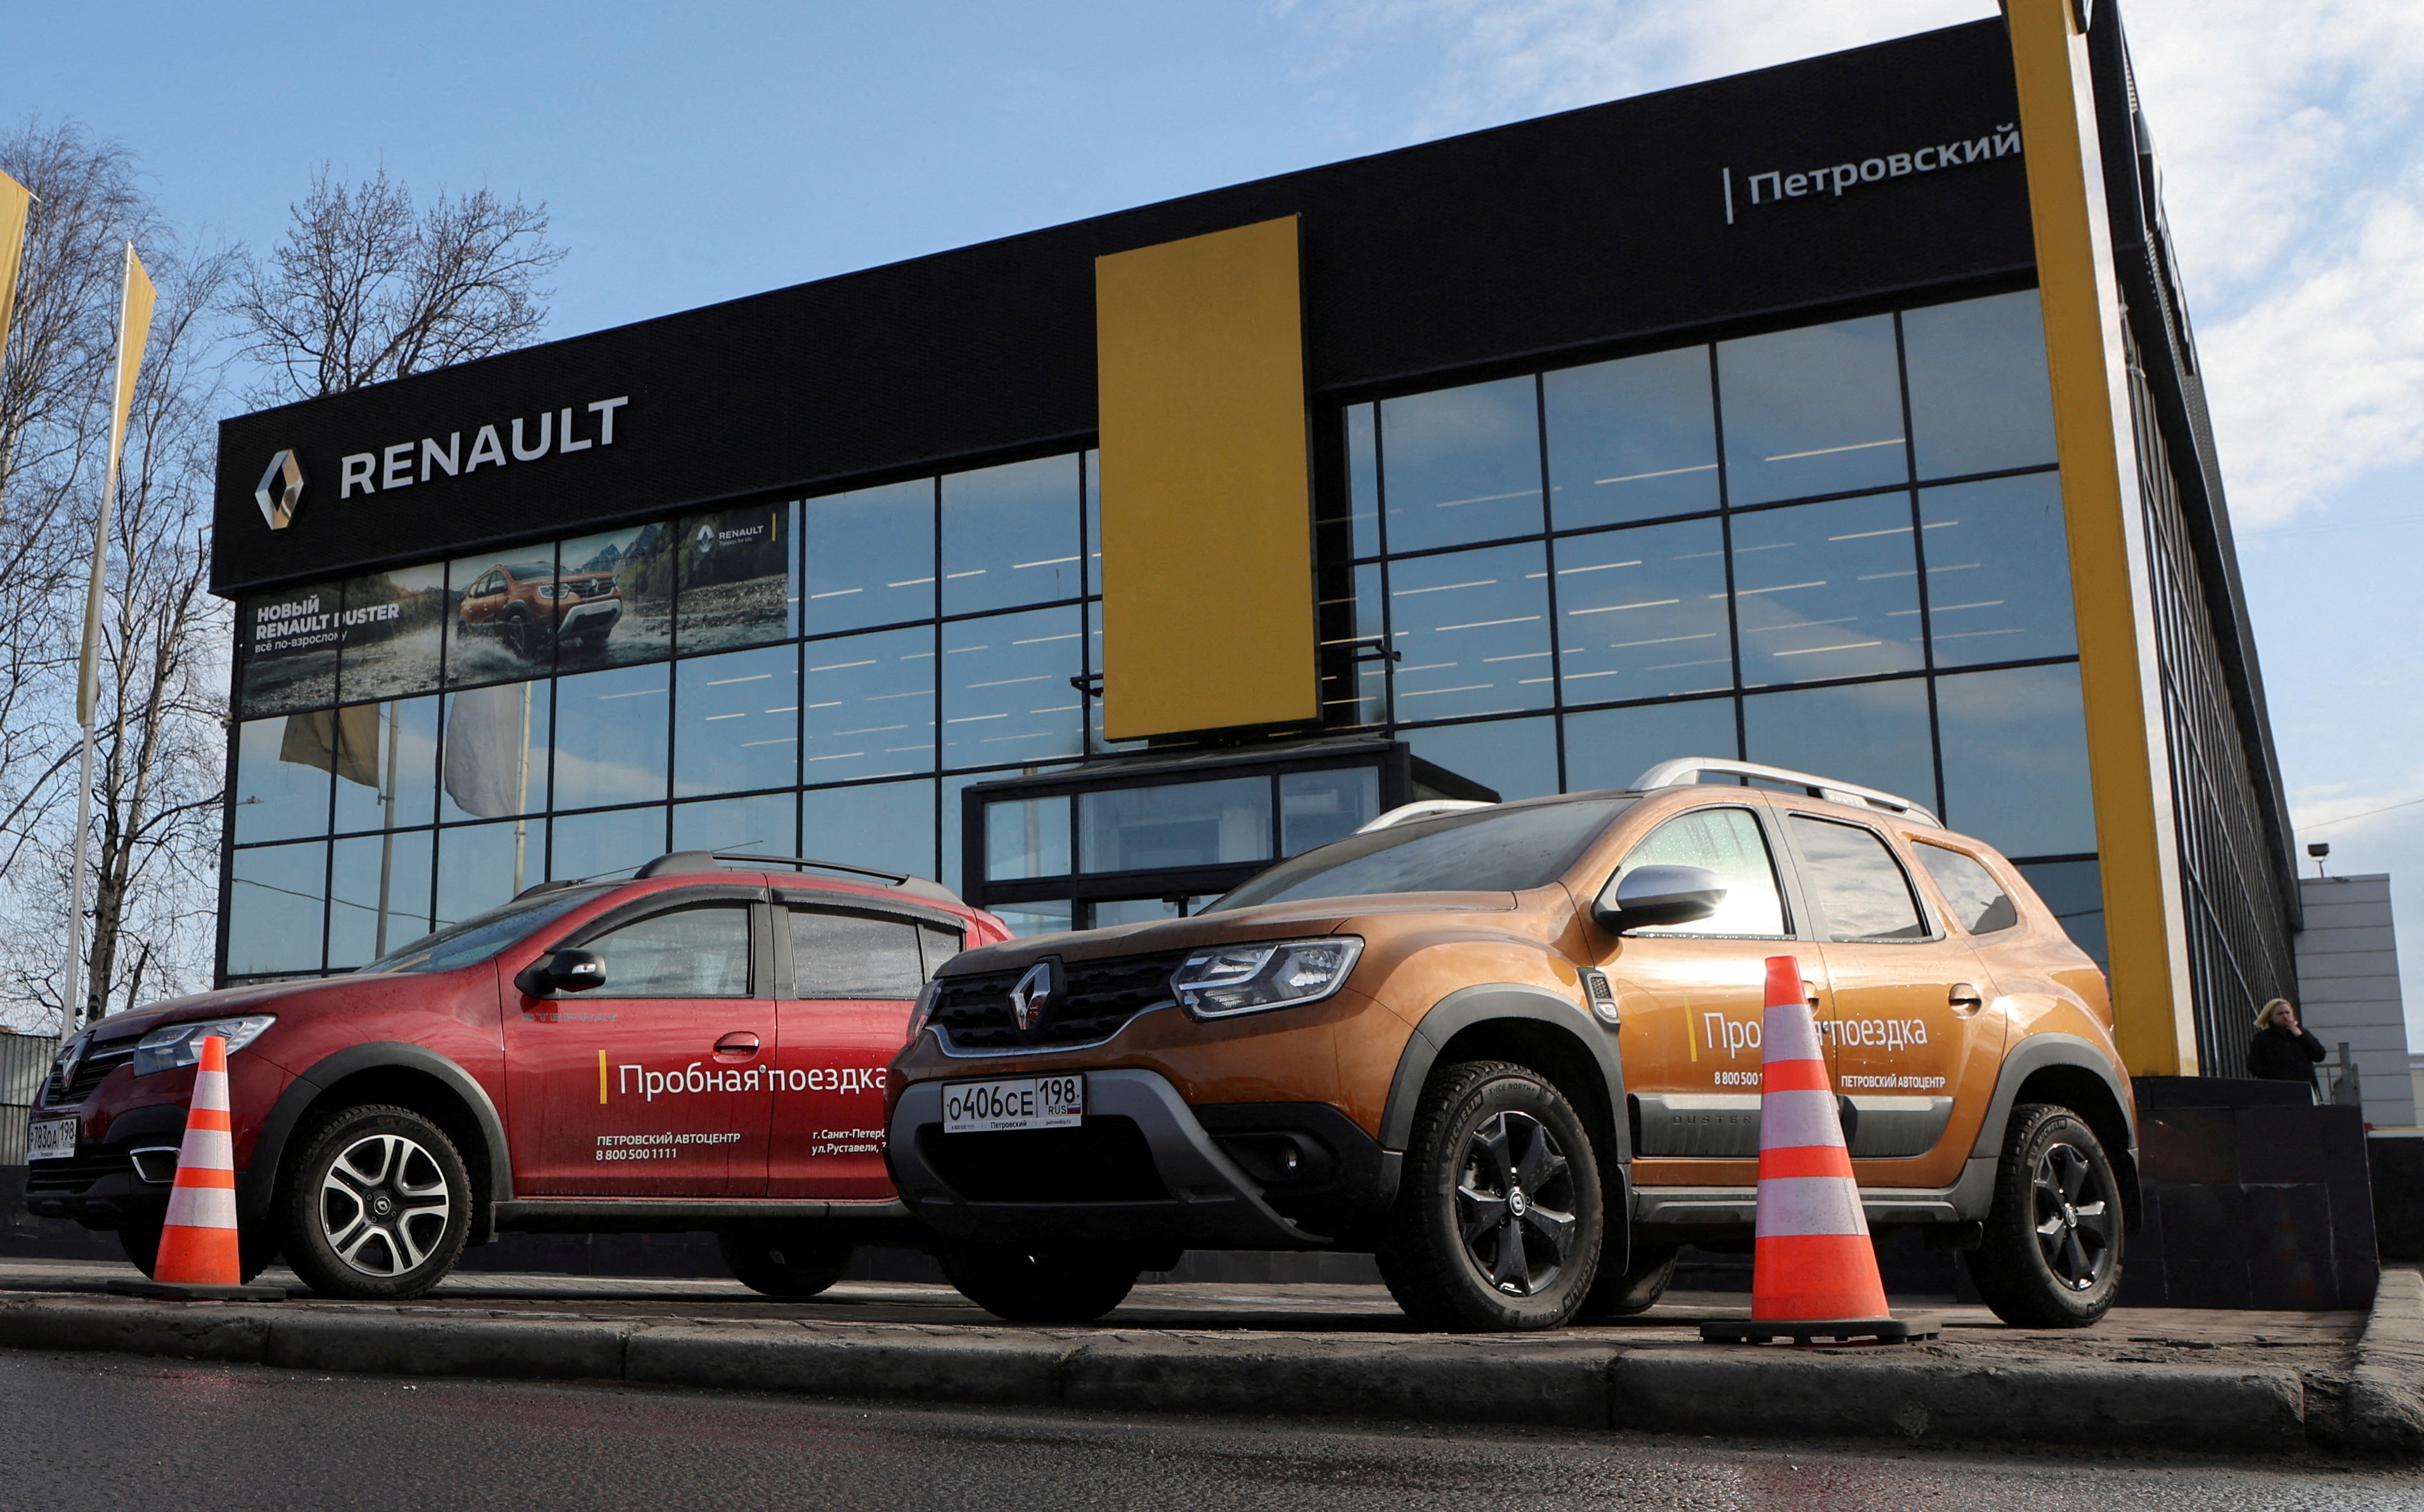 Renault cars are parked outside a showroom in Saint Petersburg